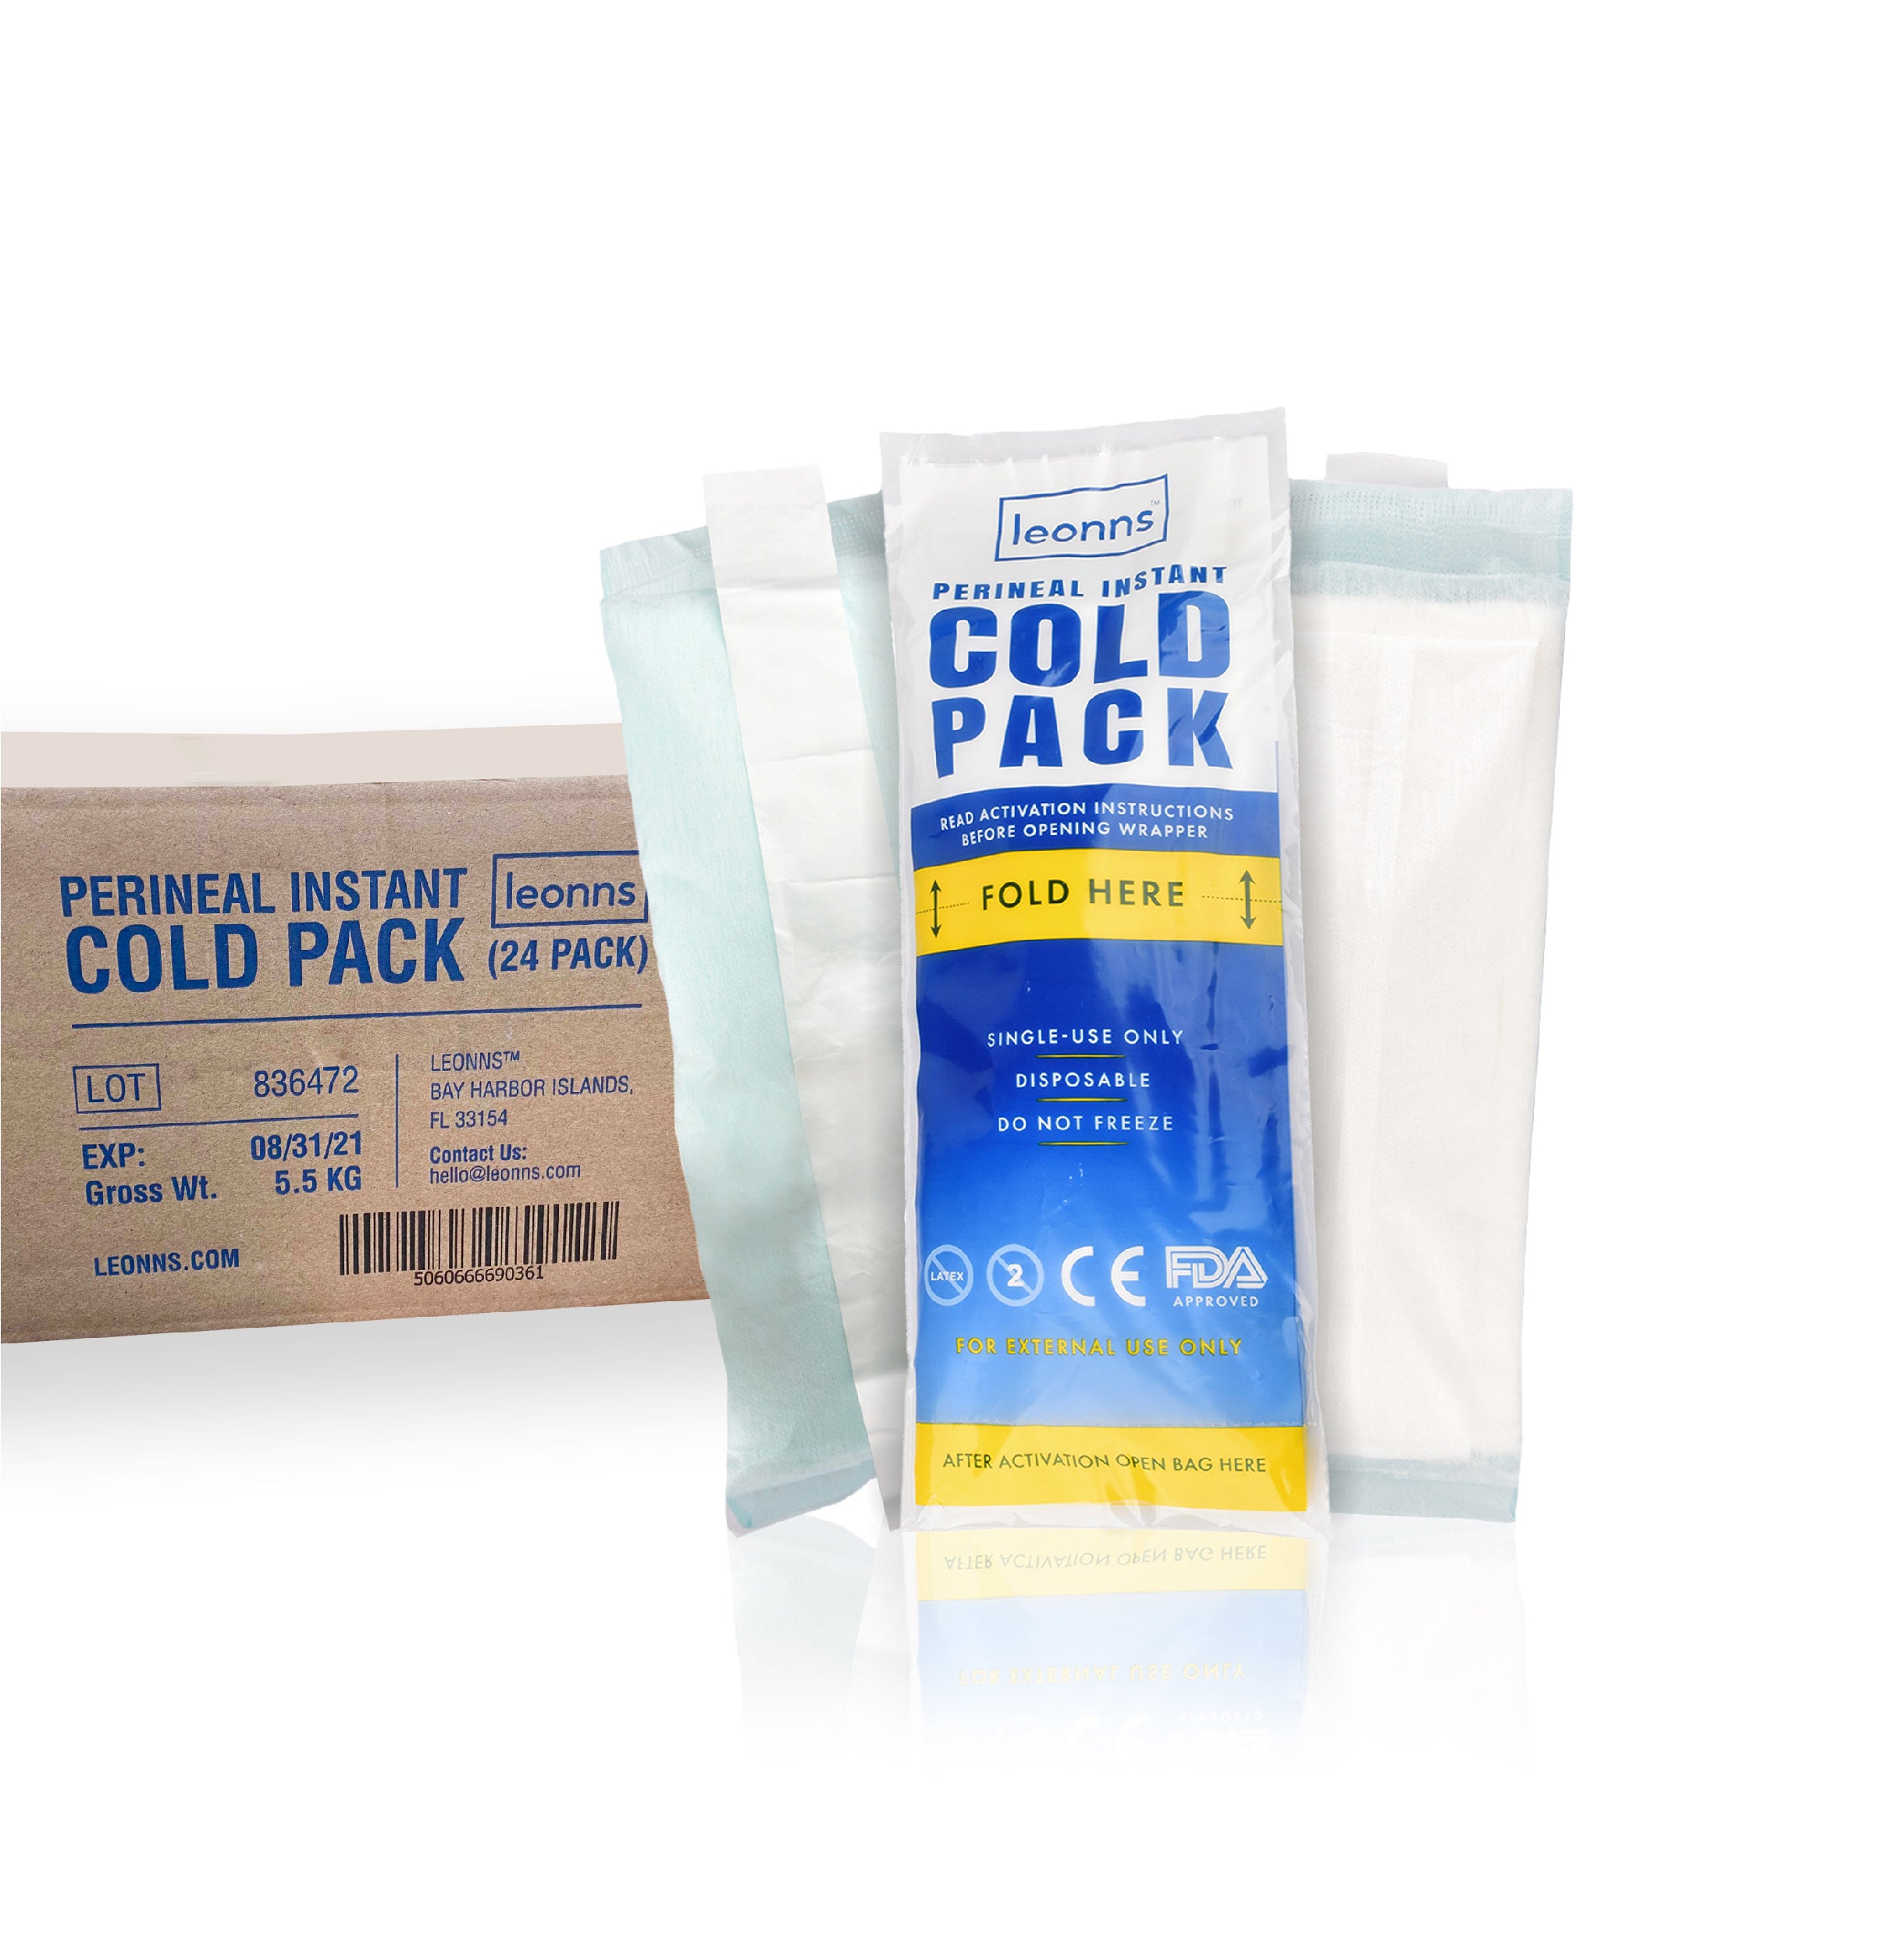 Perineal Instant Cold Pack